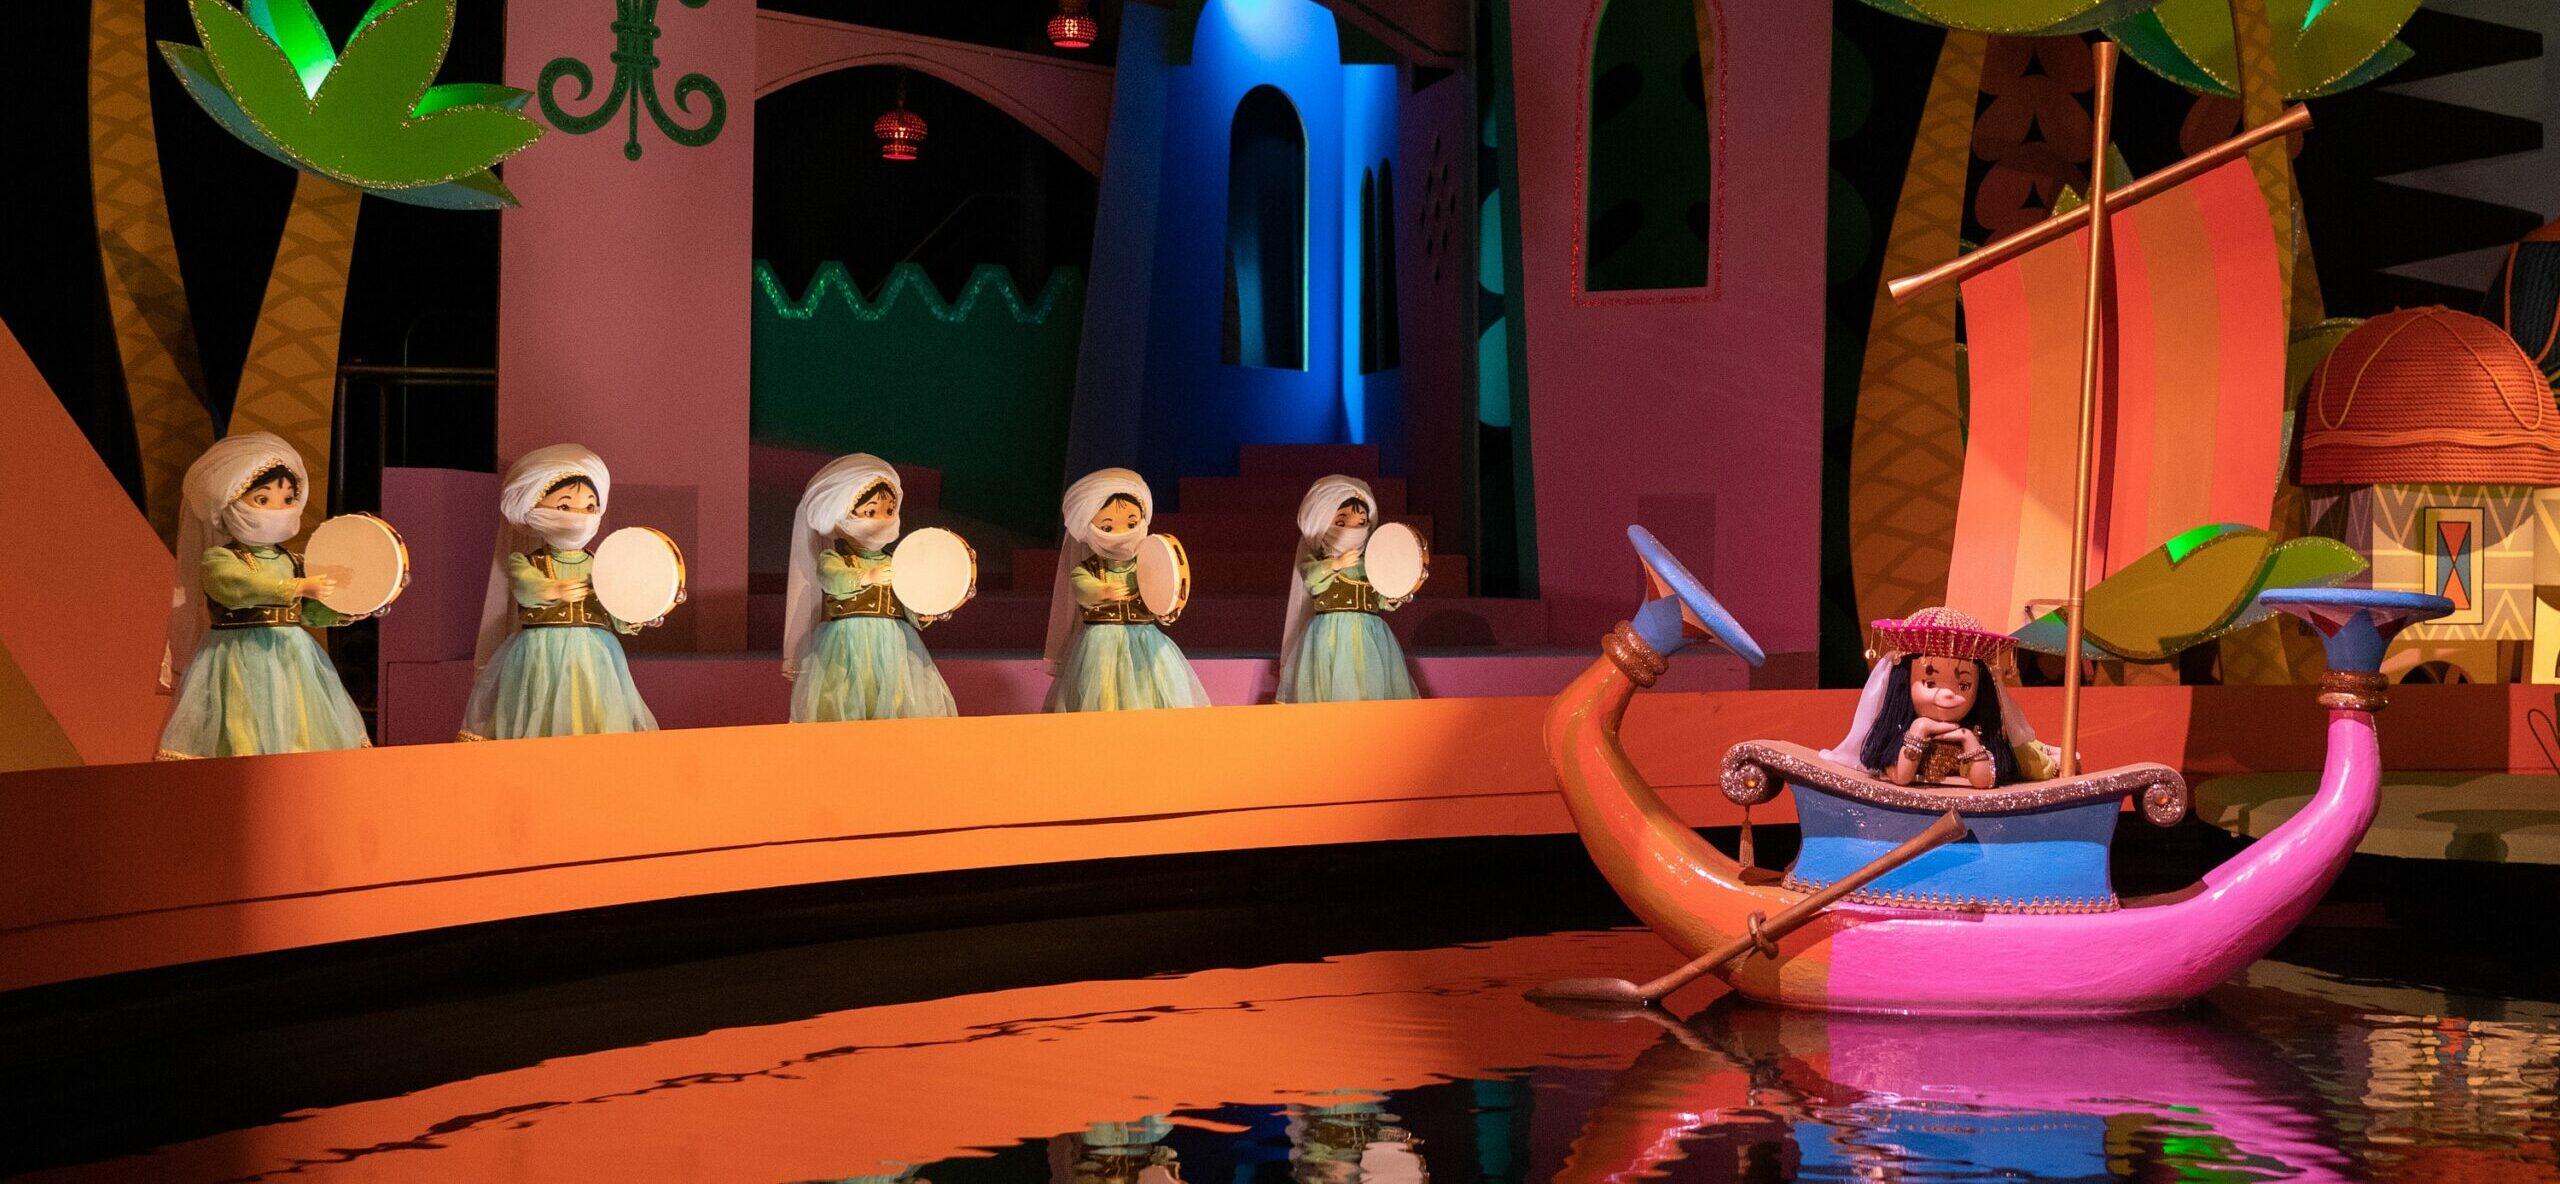 Disney World Adds New Doll With Wheelchair To “it’s a small world”